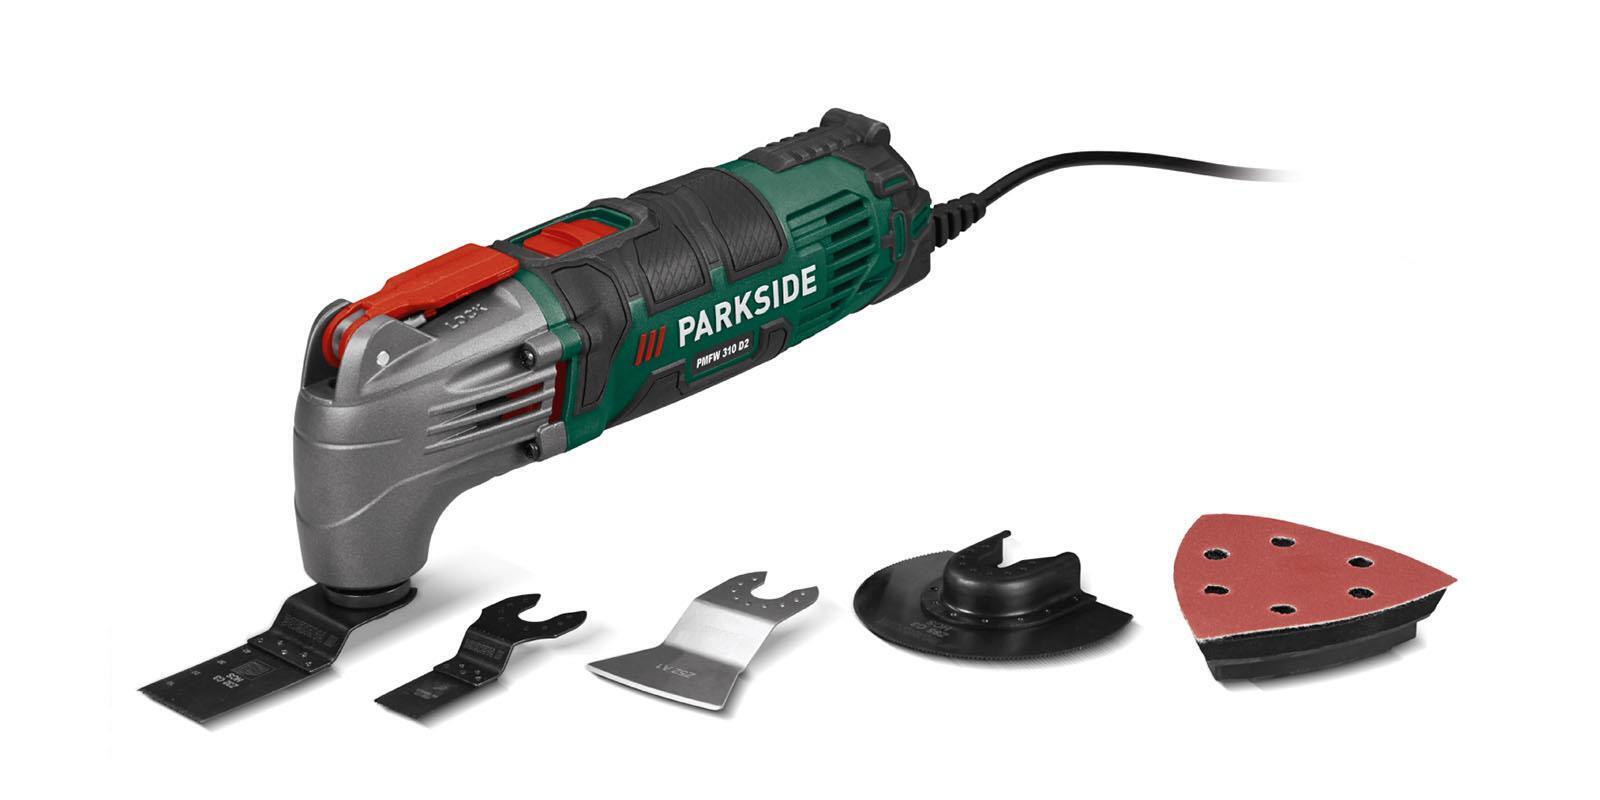 Read more about the article PARKSIDE Multifunktionswerkzeug PMFW 310 D2 Test & Angebot